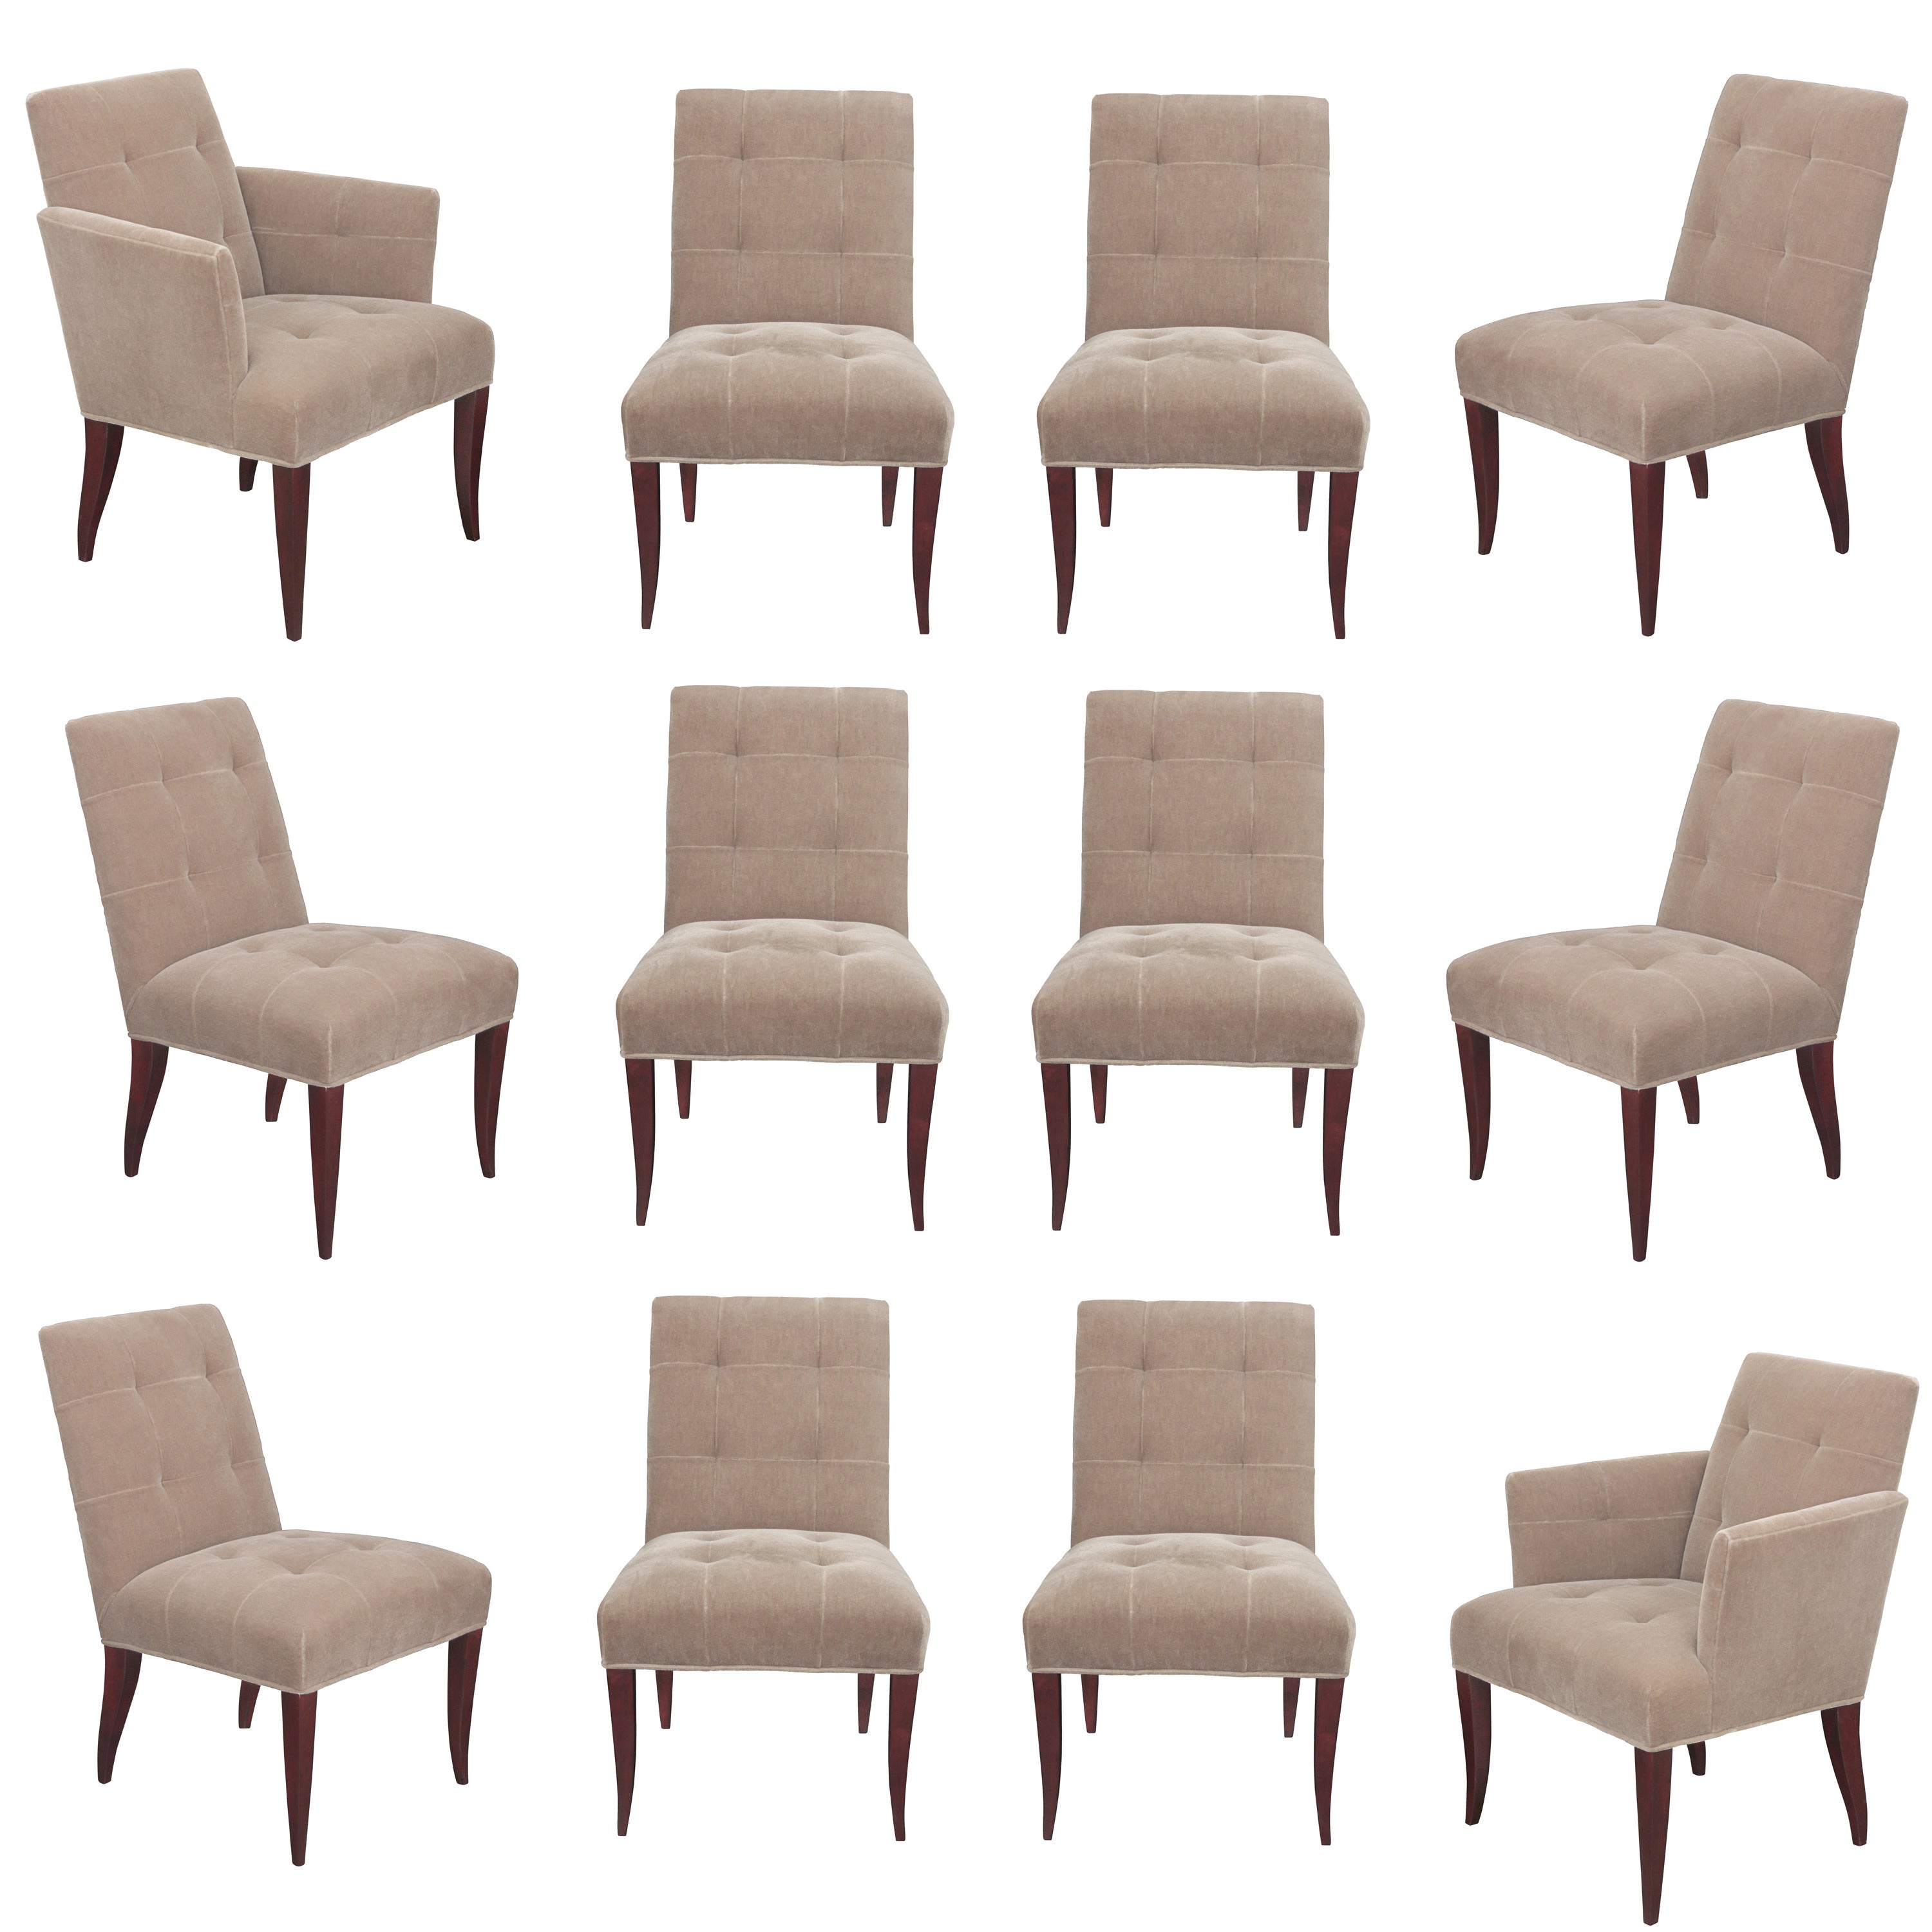 Set of 12 Eaton Dining Chairs by John Hutton for Donghia